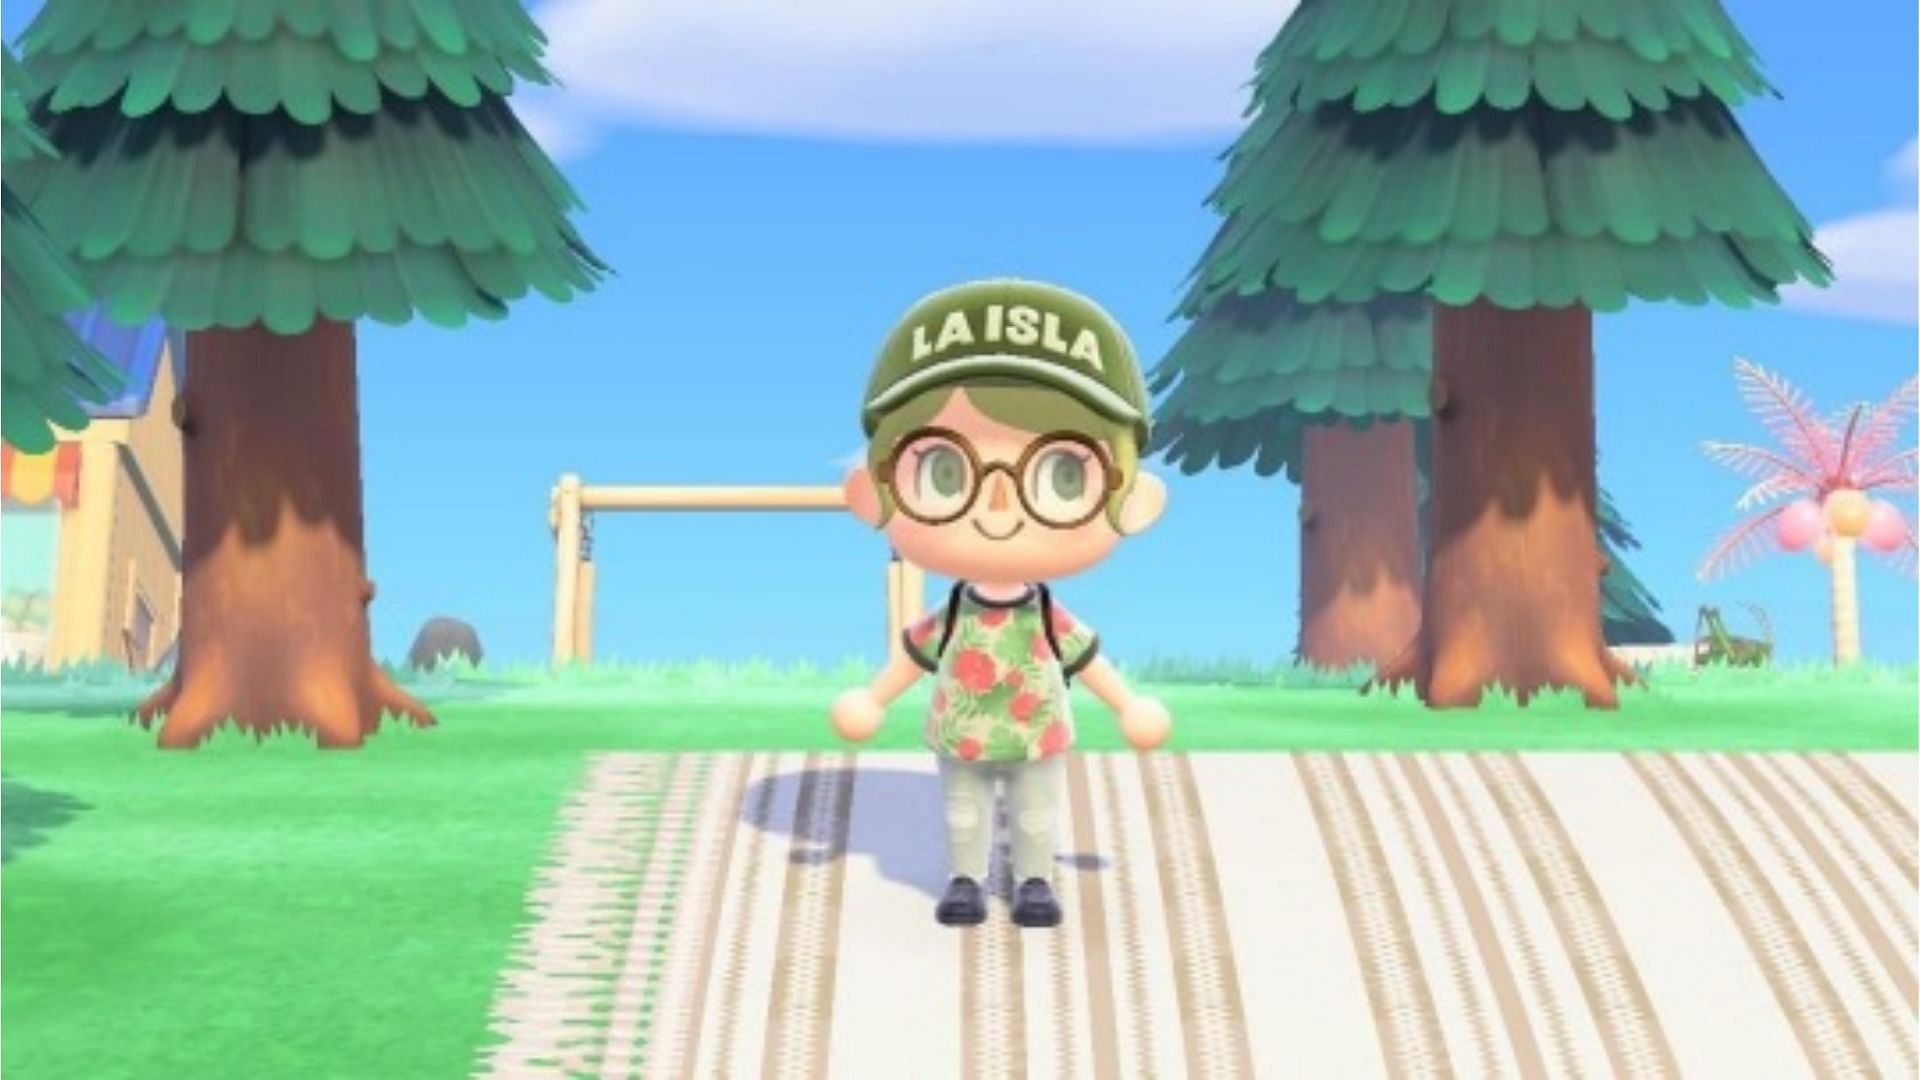 Animal Crossing: New Horizons players can often be seen sporting the Knapsack in the game (Image via Tumgir)